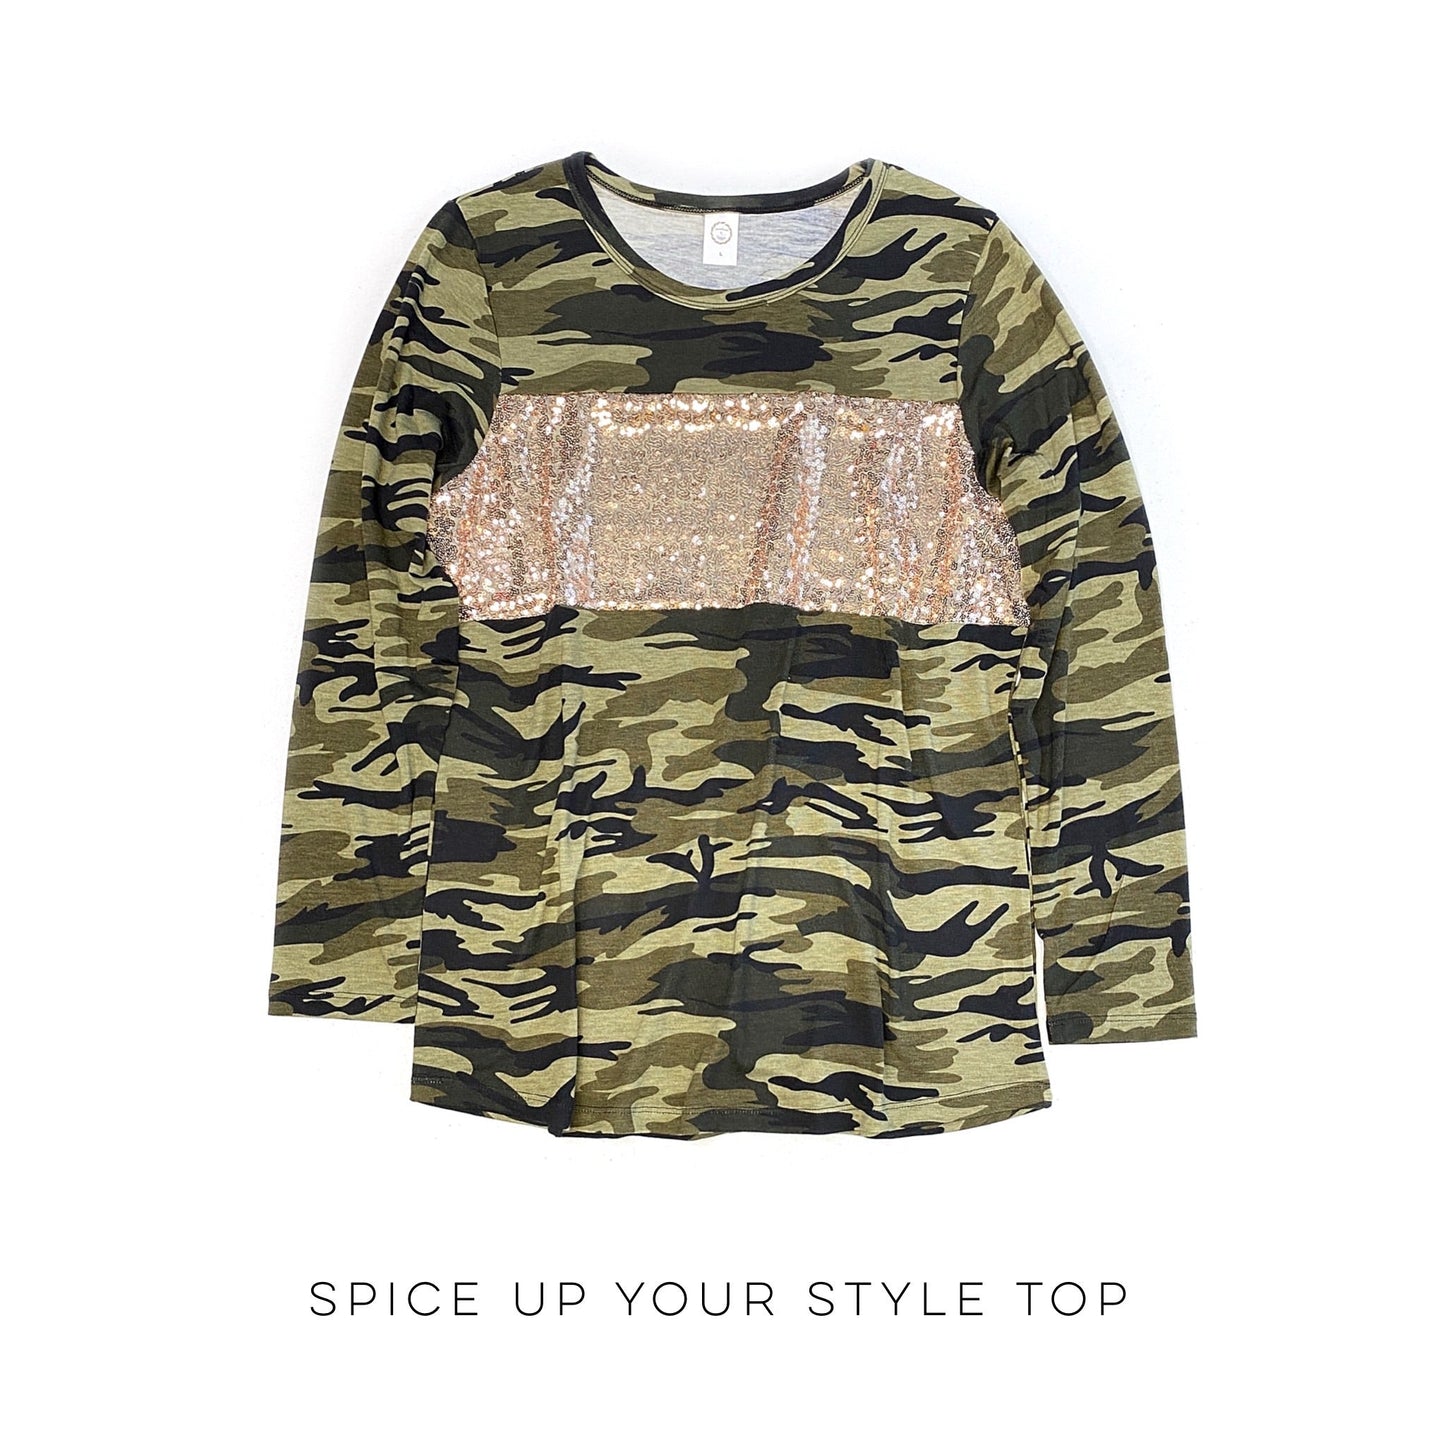 Spice Up Your Style Top